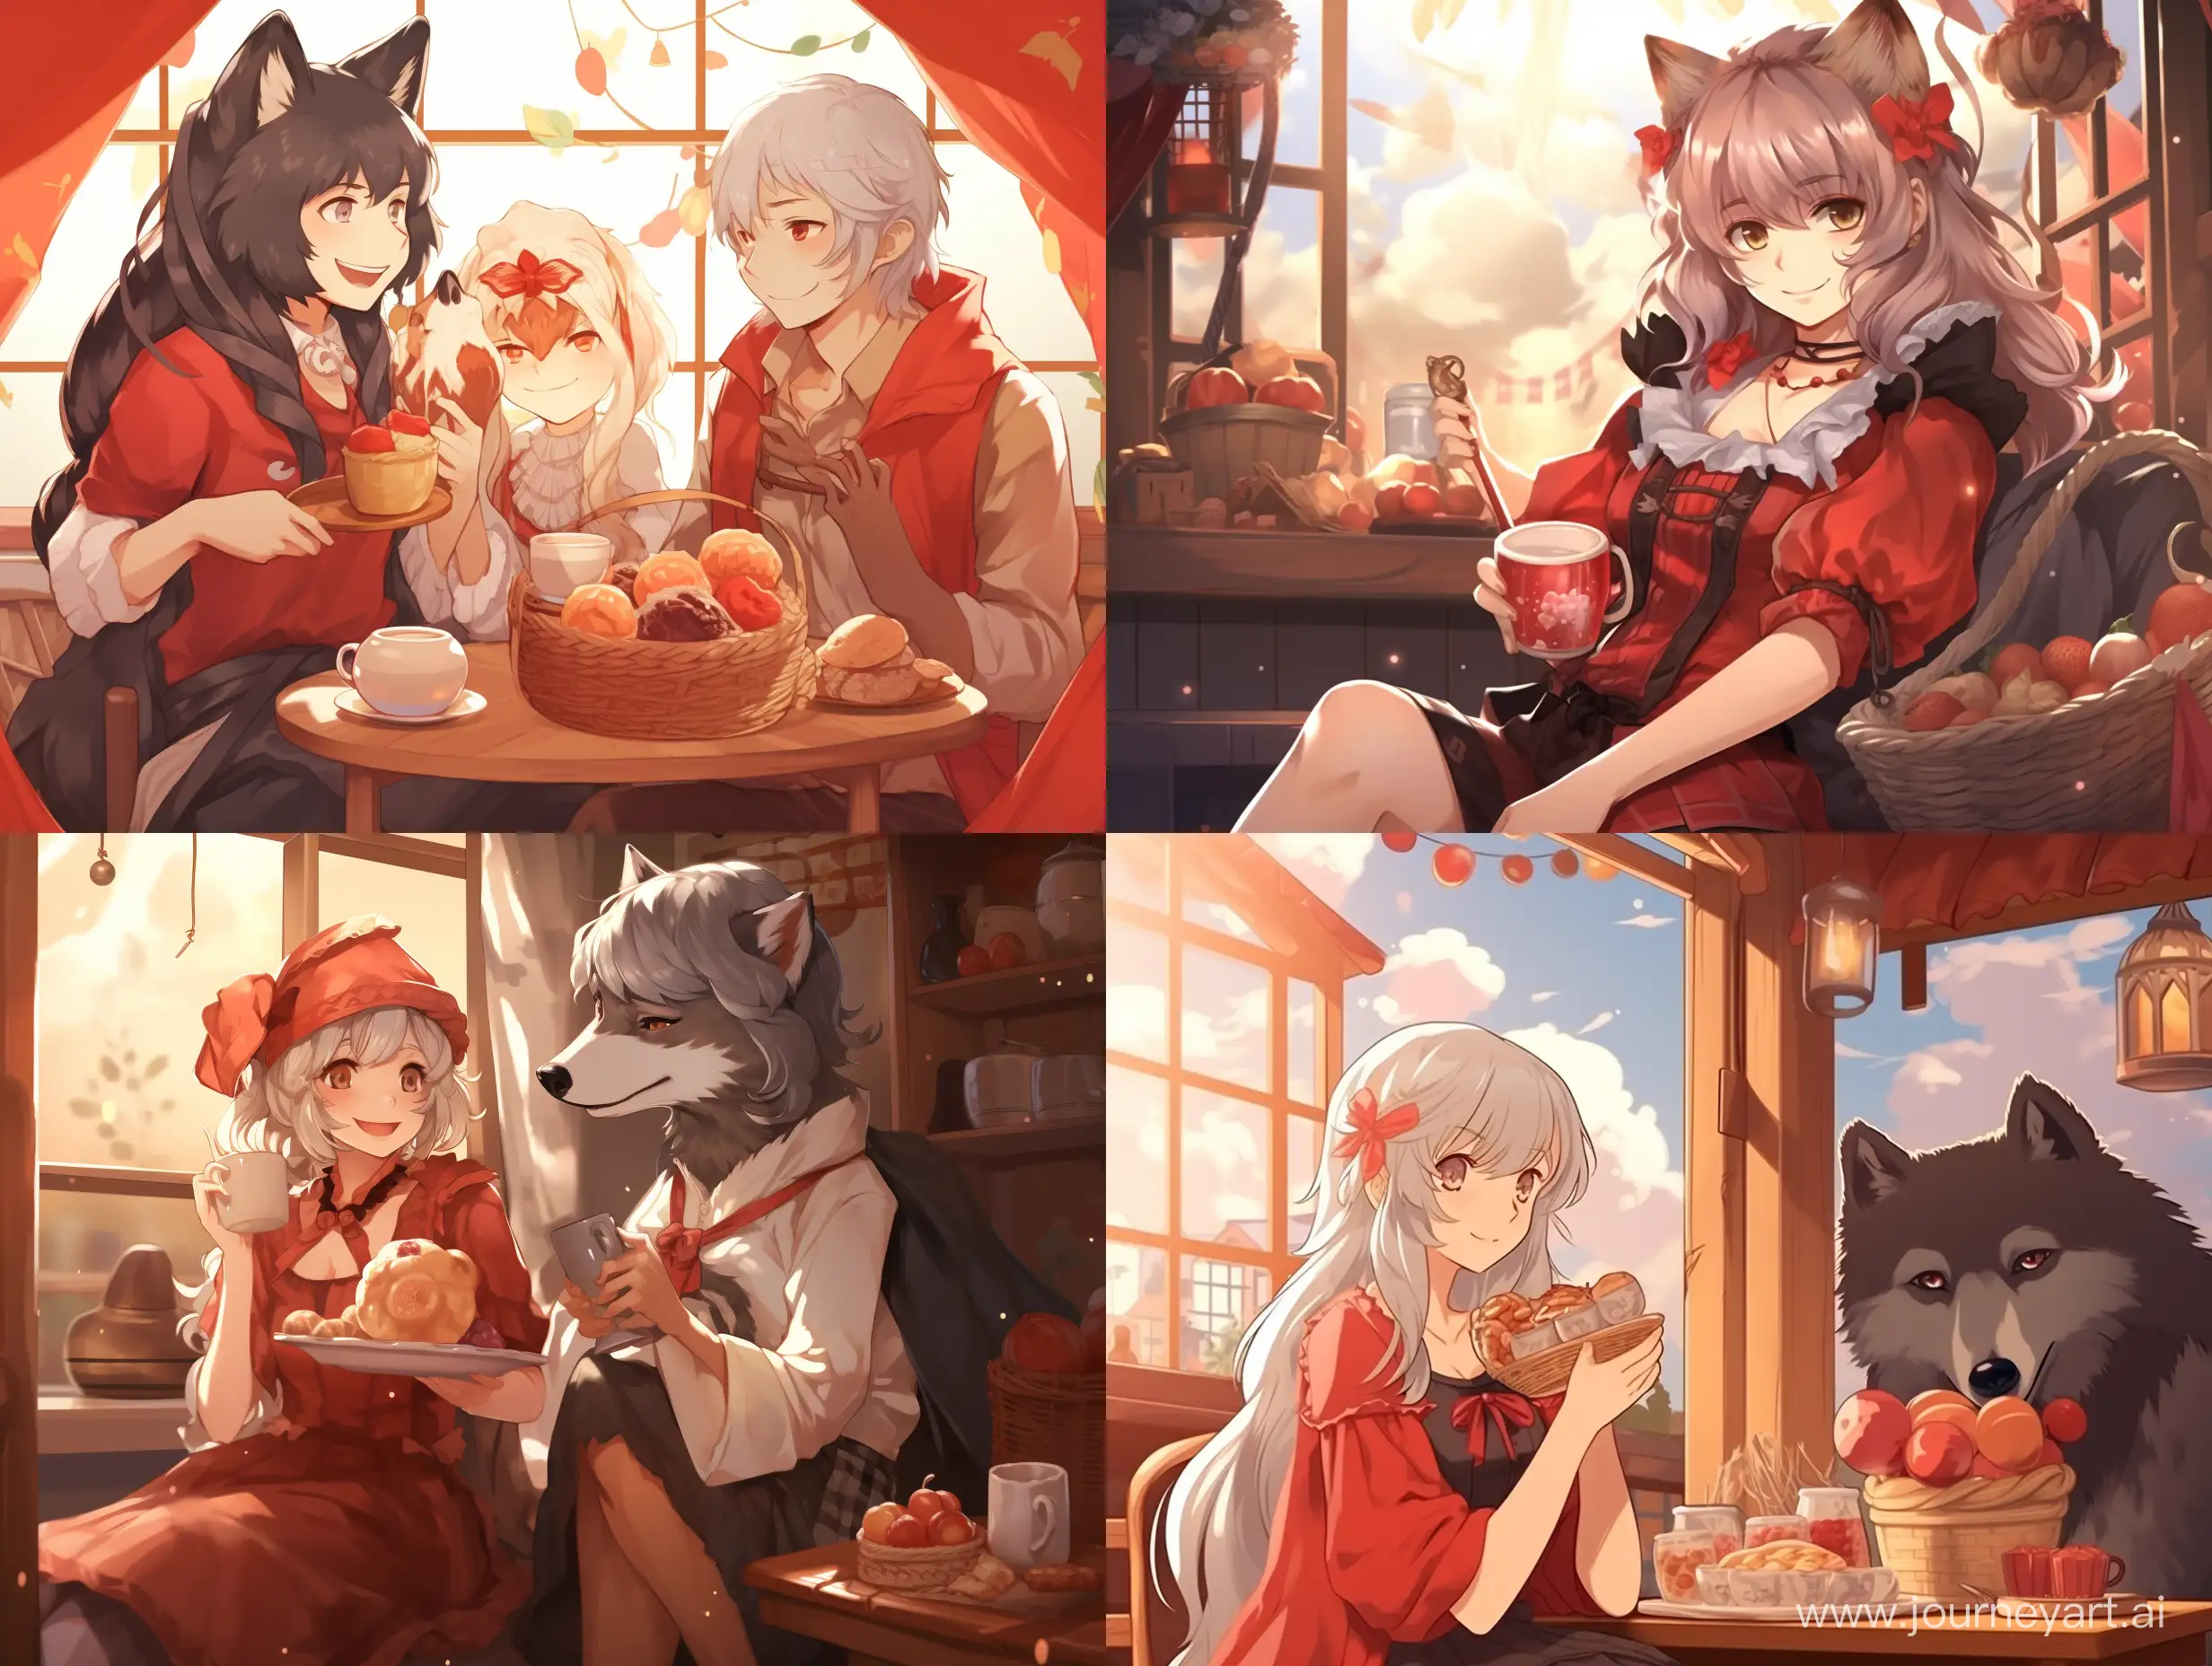 Charming-Anime-Fox-Girl-Red-Riding-Hood-Tea-Time-with-Wolf-and-Granny-Fox